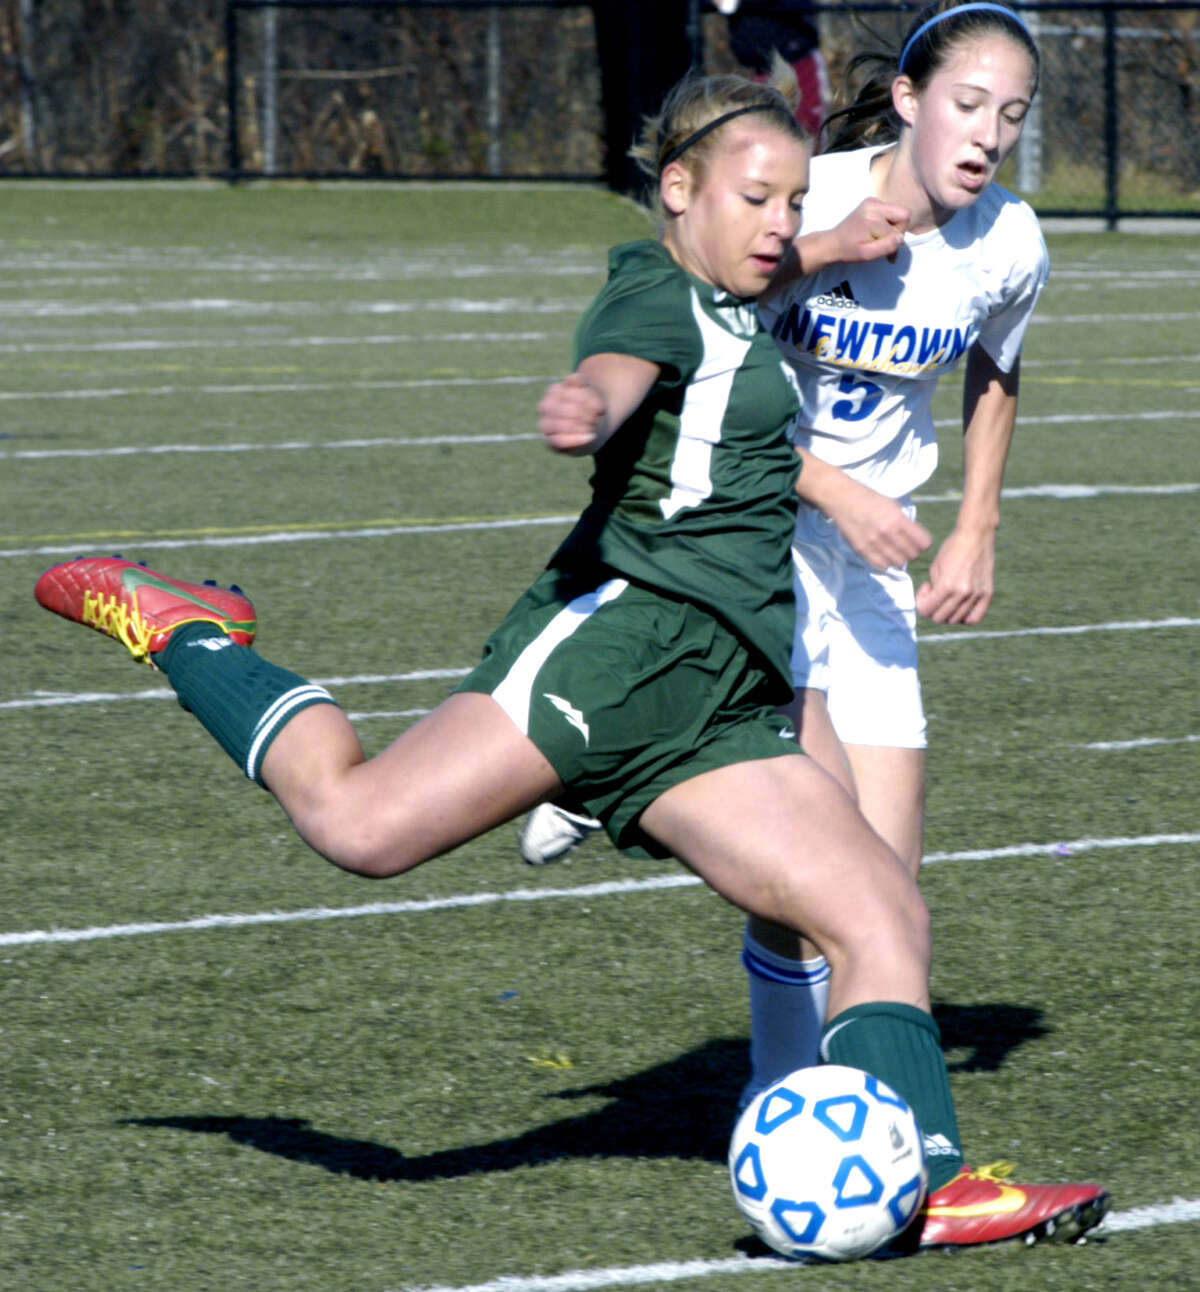 The Green Wave's Jen Millar during New Milford High School girls' soccer's state class 'LL' semifinal match vs. Newtown in Waterbury. Nov. 17, 2012